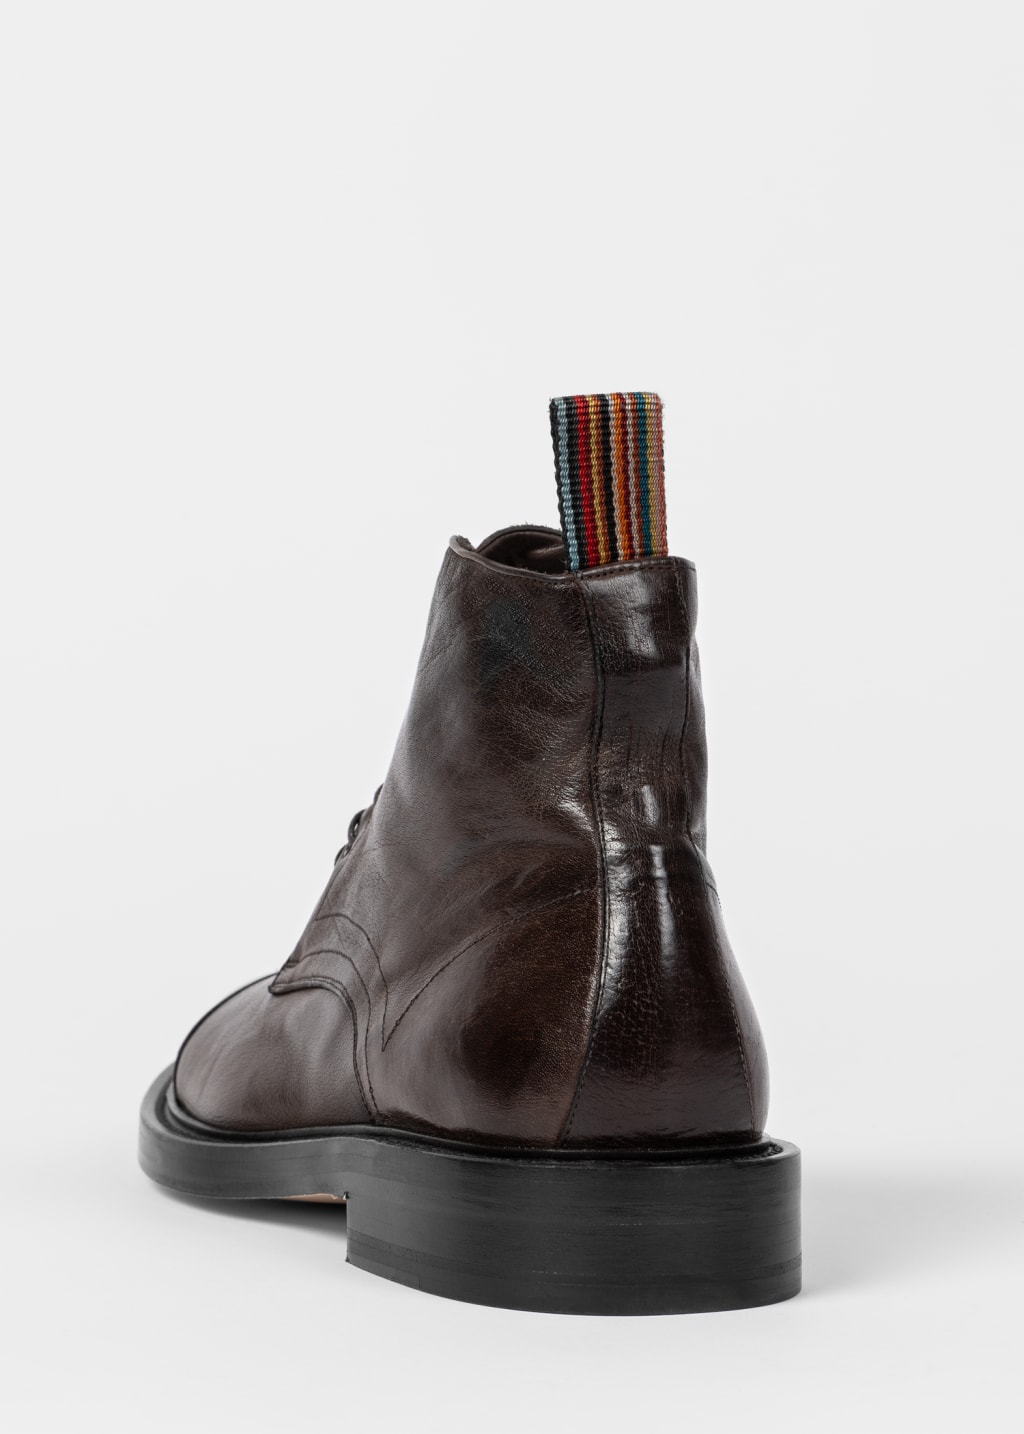 Detail View - Dark Brown Leather 'Newland' Boots Paul Smith